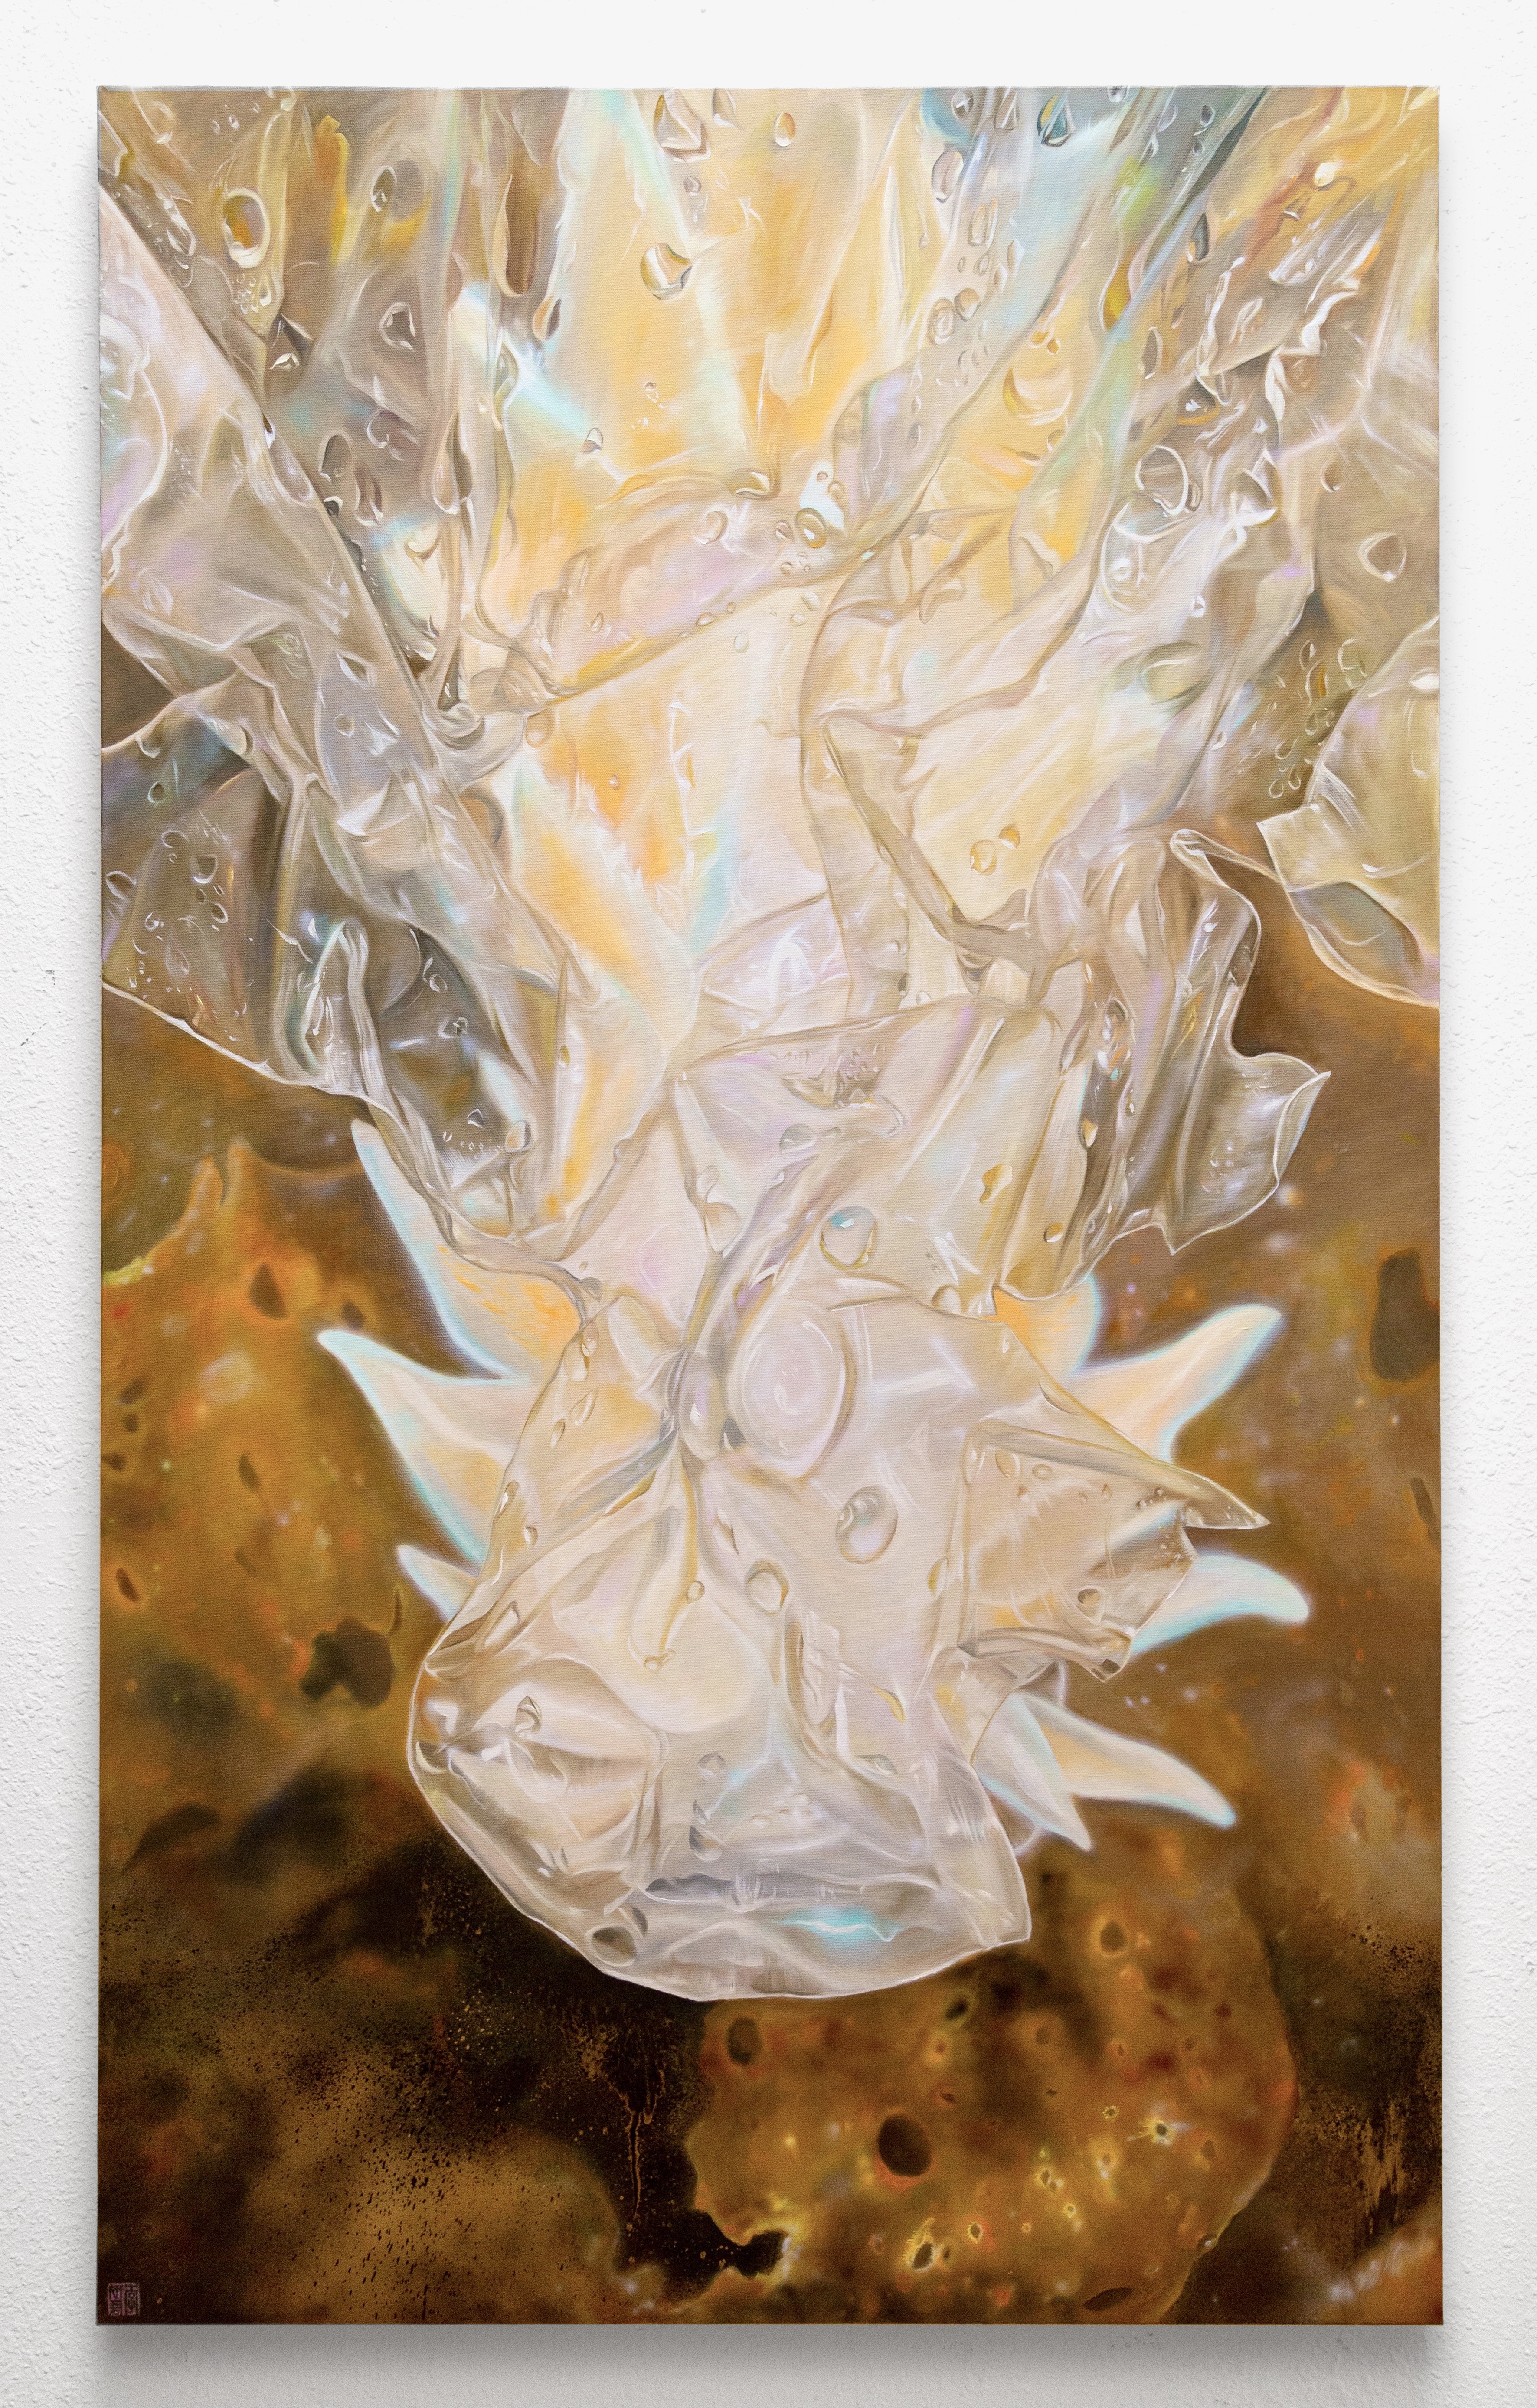 Shield, 2022, 36x60 inches, oil on canvas